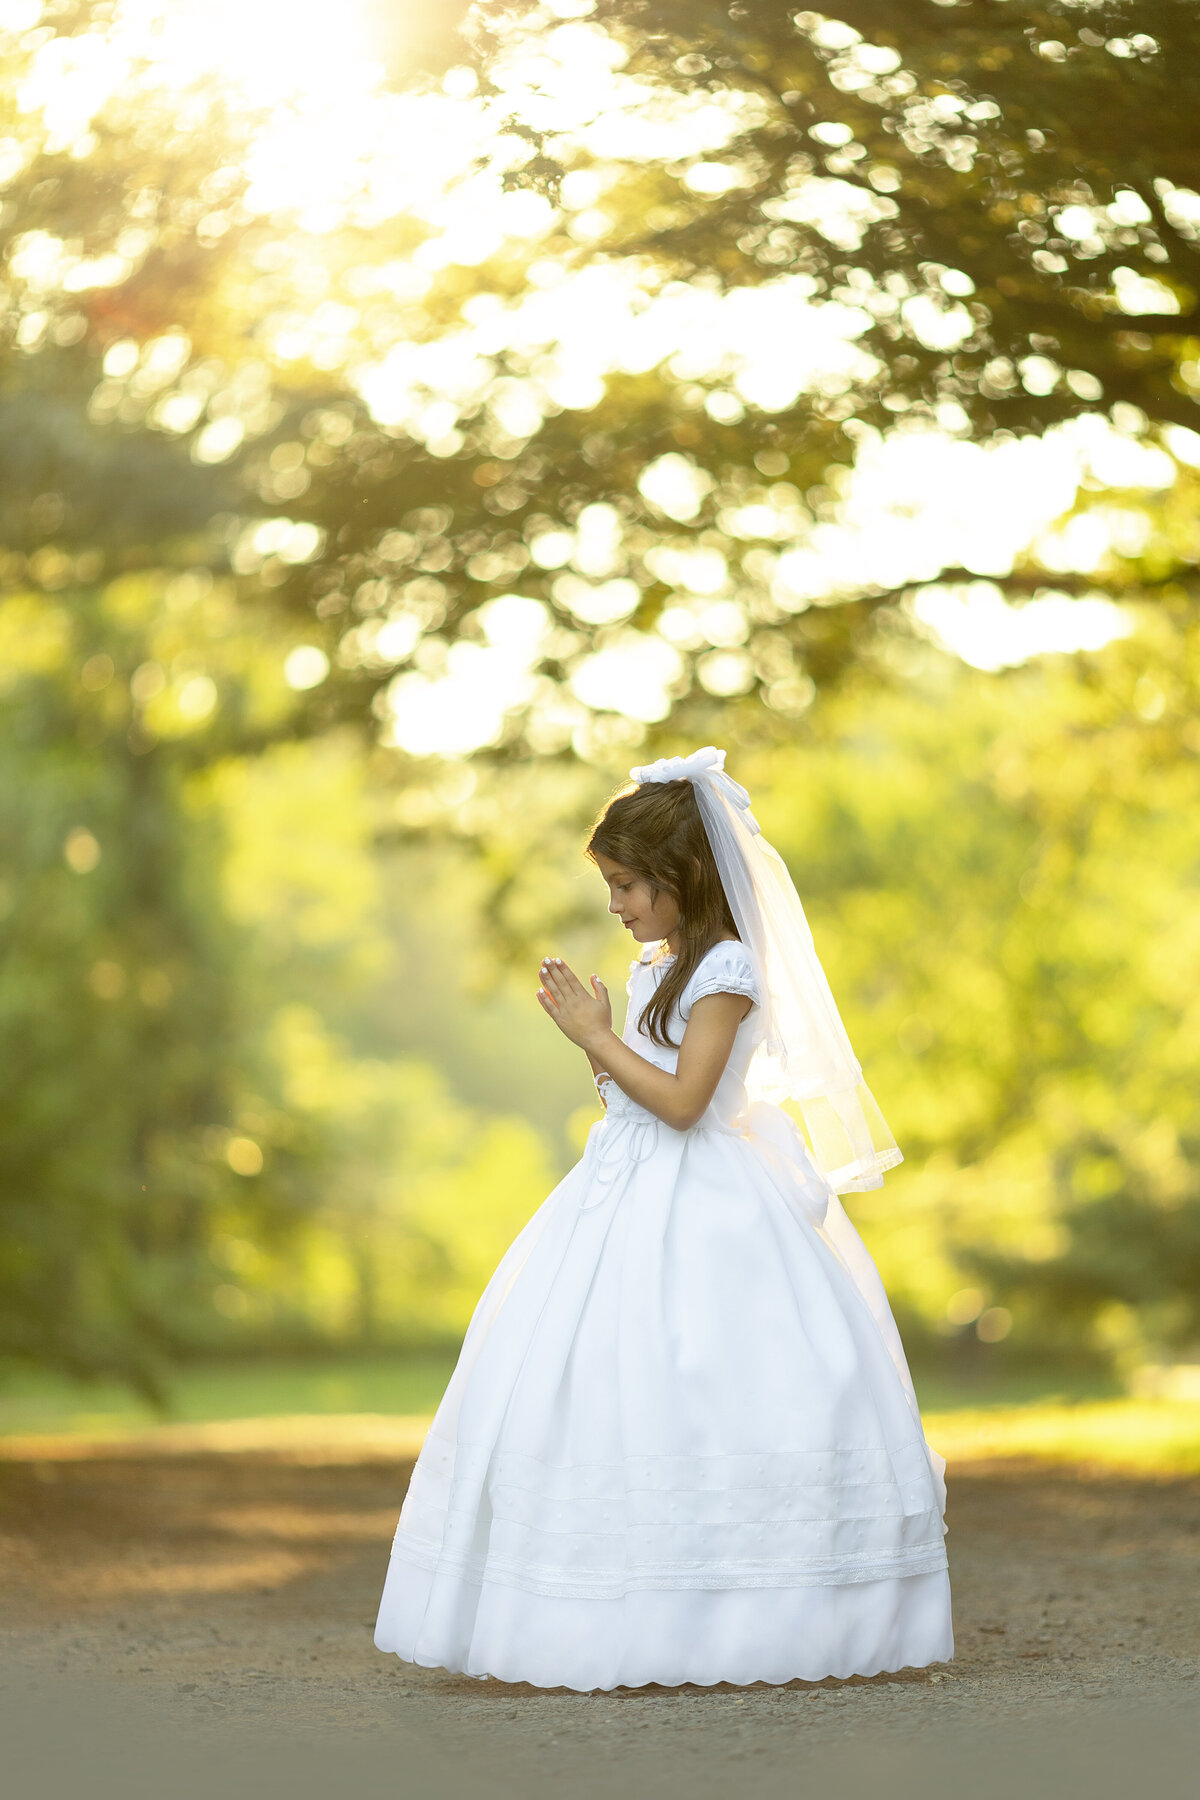 A young girl in a communion dress prays while standing in a park path at sunset